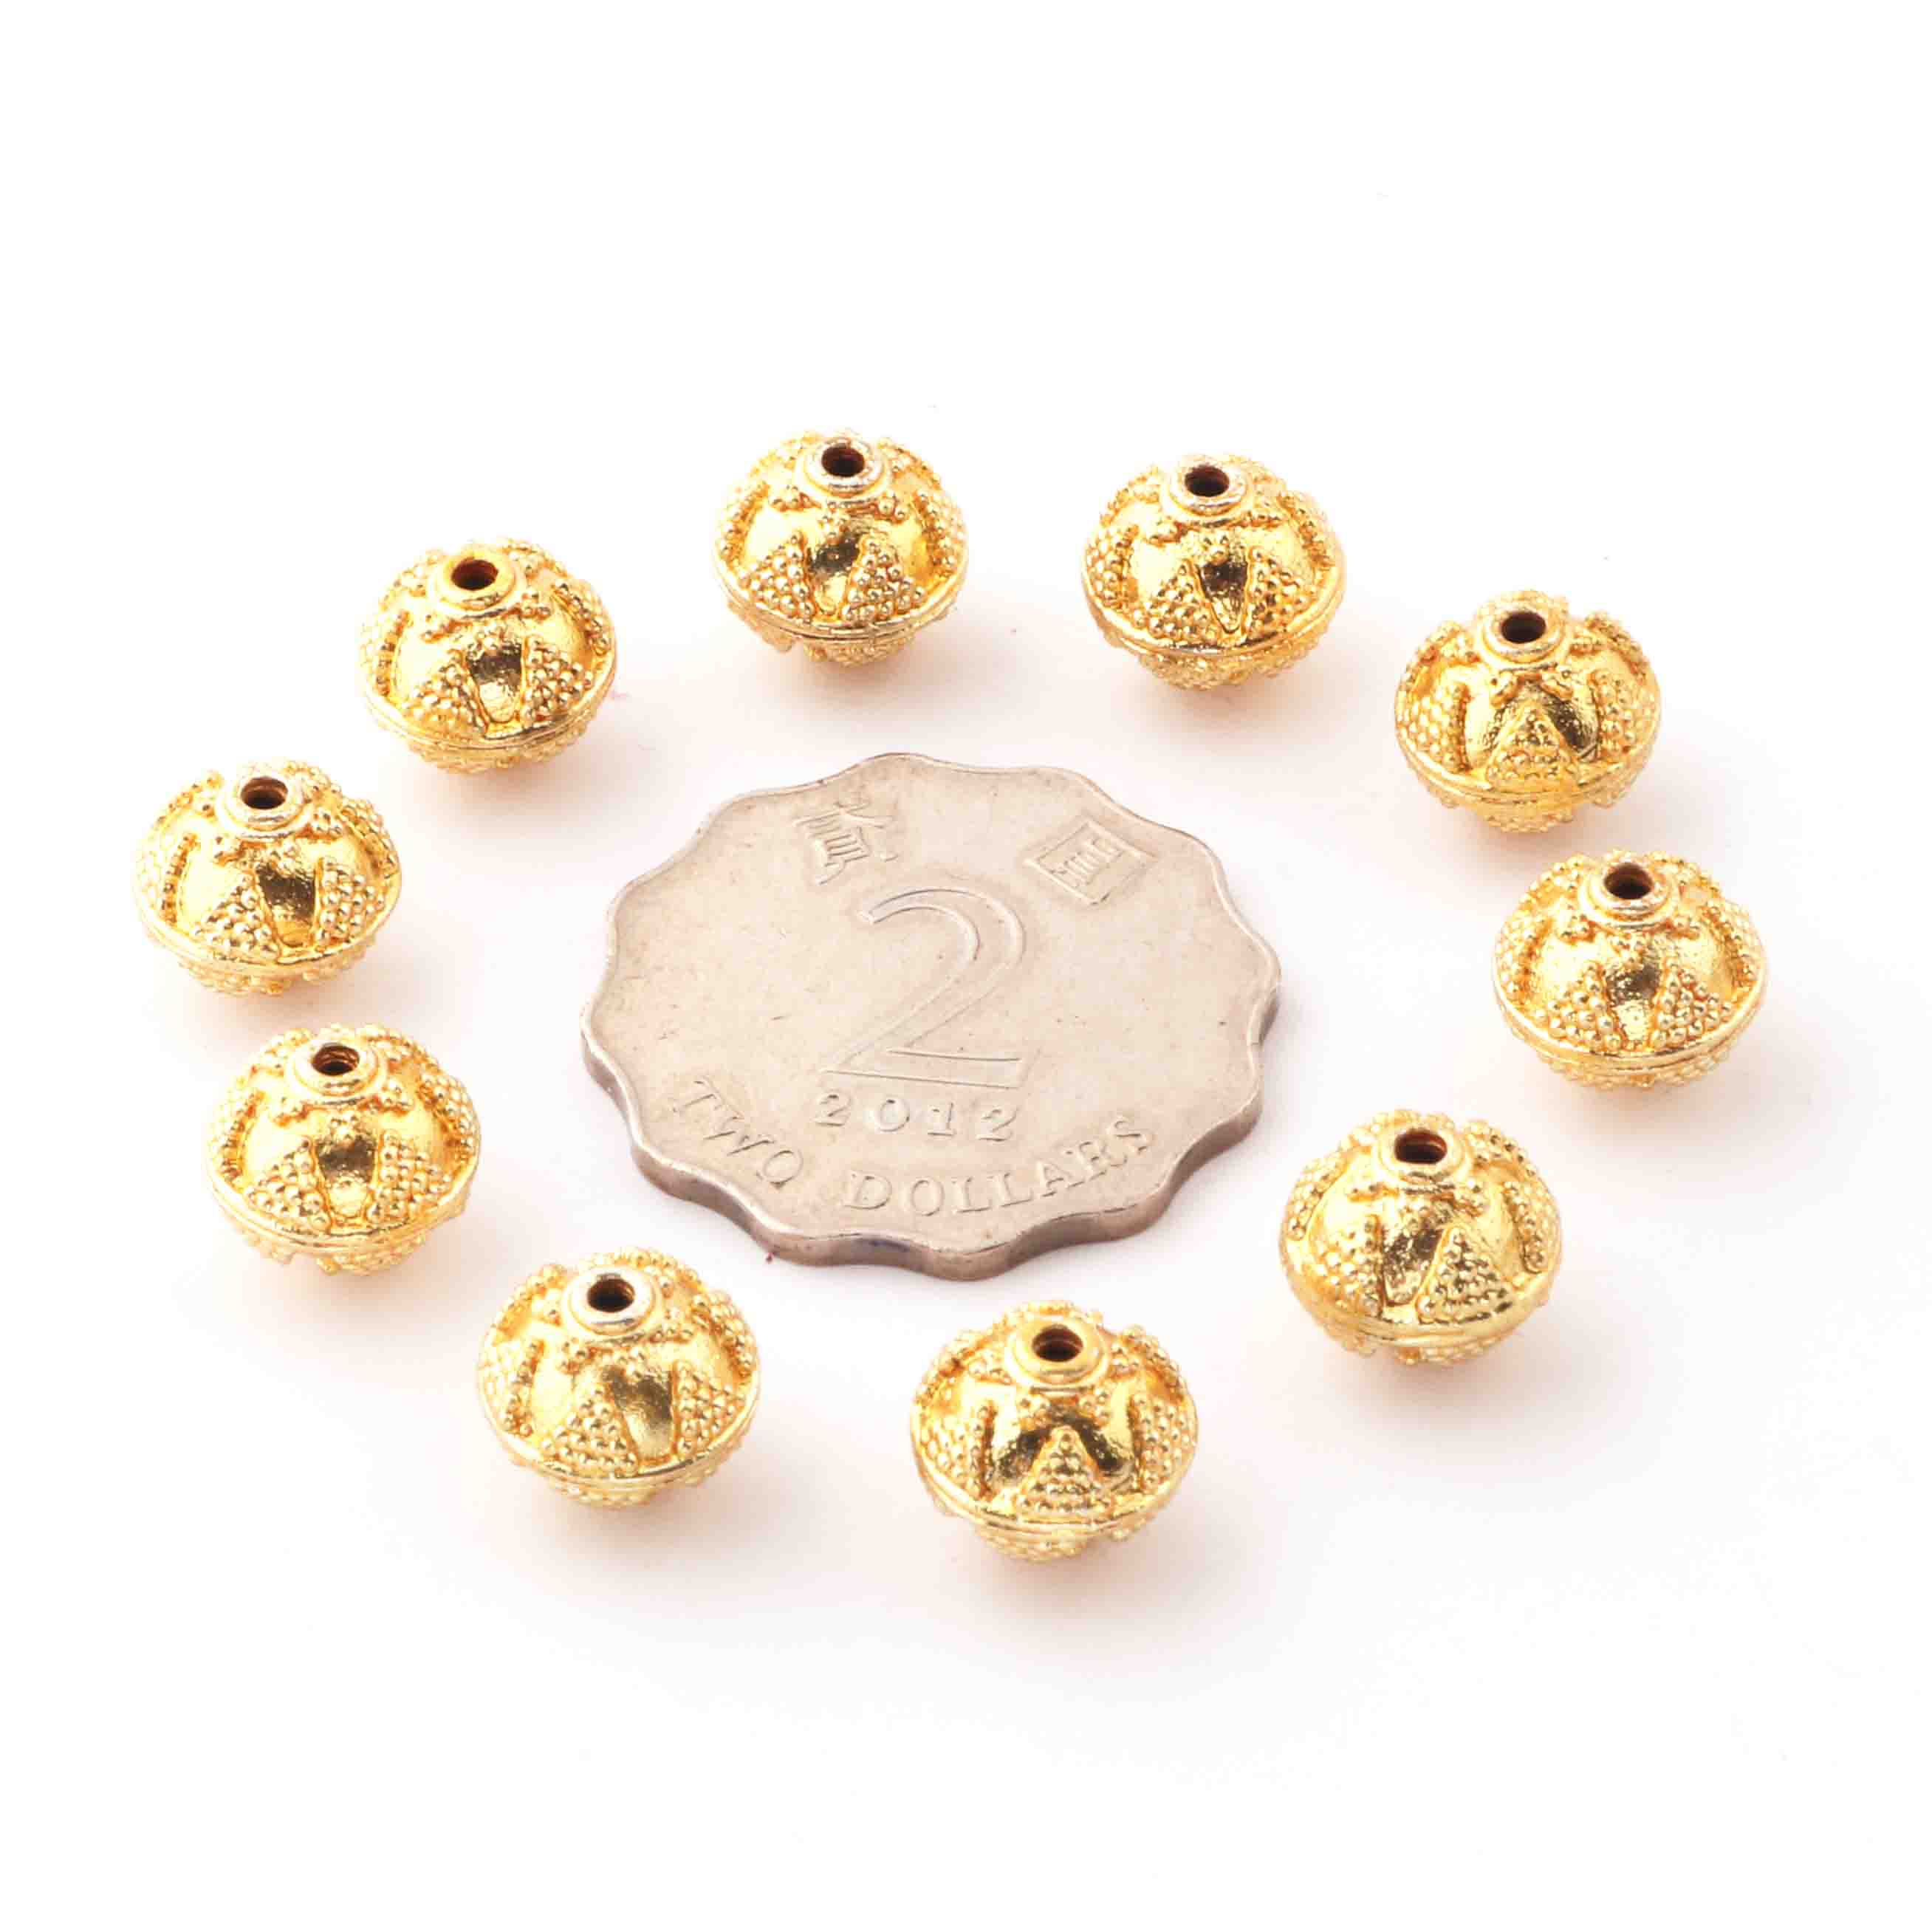 1 Strand 24k Gold Plated Designer Copper Casting Round Ball Beads- 11mm - Jewelry  Making - 9 Inches GPC875